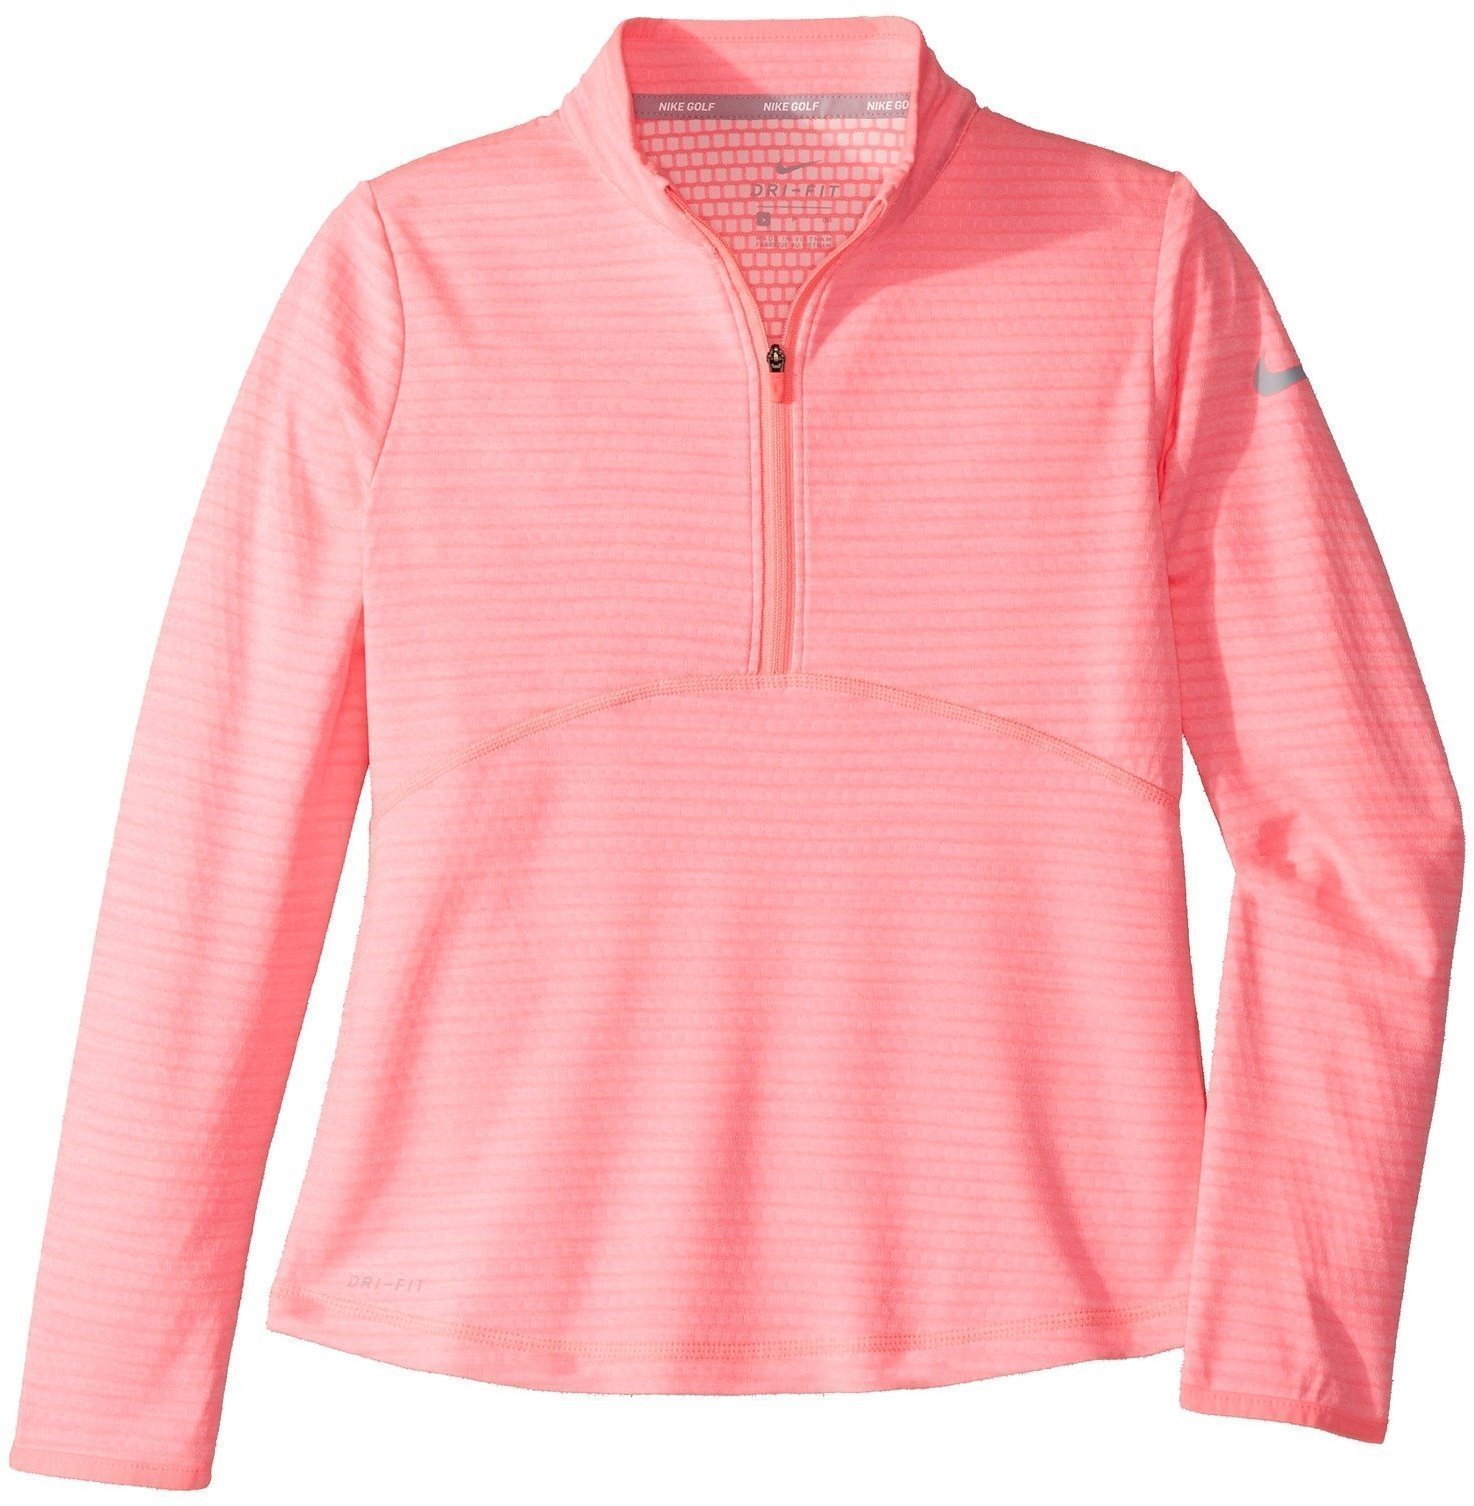 Pulover s kapuco/Pulover Nike Girls Dry Long Sleeve Top Sunset Pulse/Flt Silver L